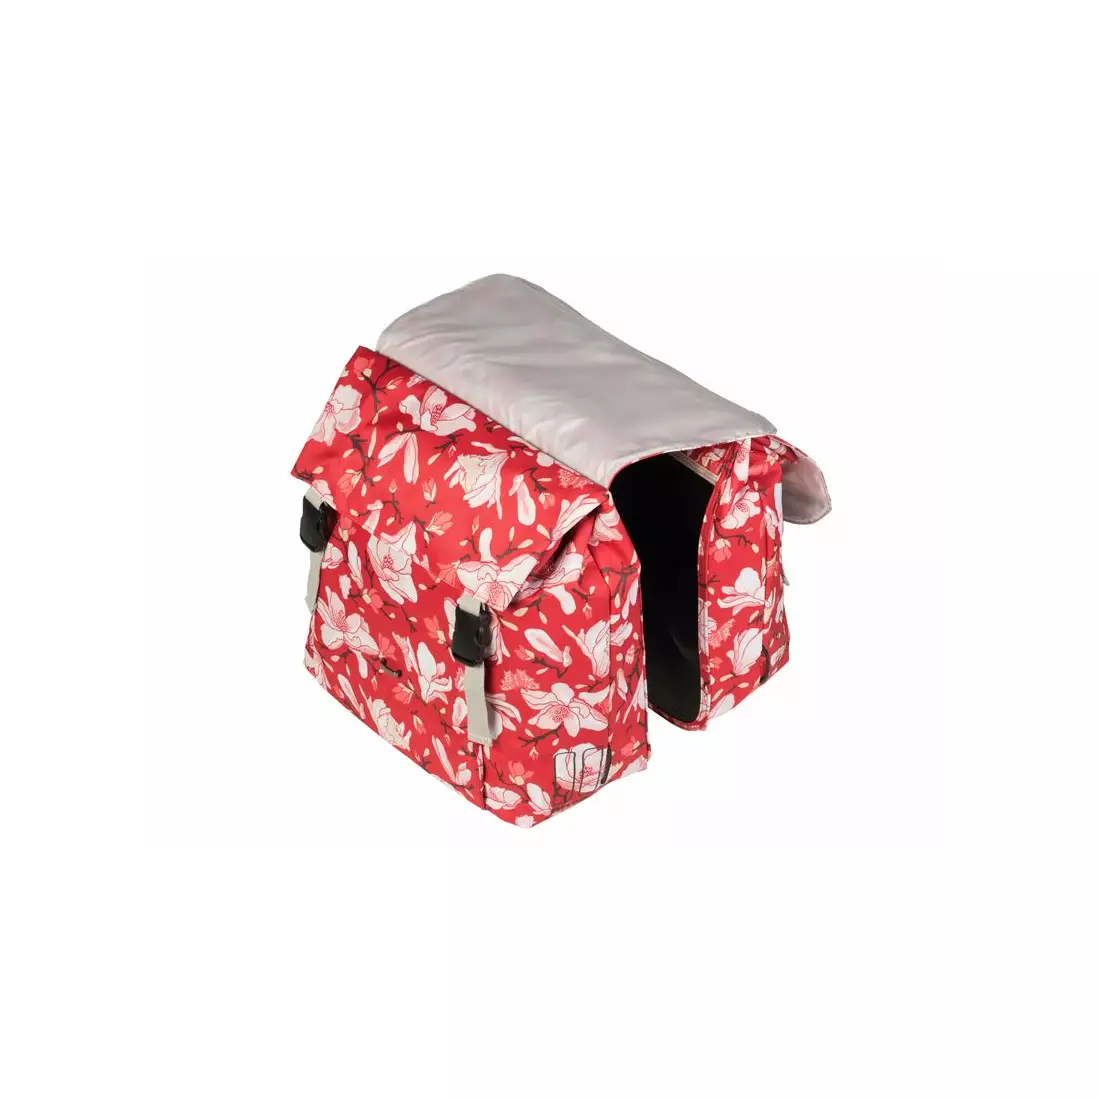 Bicycle bag BASIL MAGNOLIA DOUBLE BAG 35L, Universal Bridge System, waterproof polyester, red poppy BAS-17687